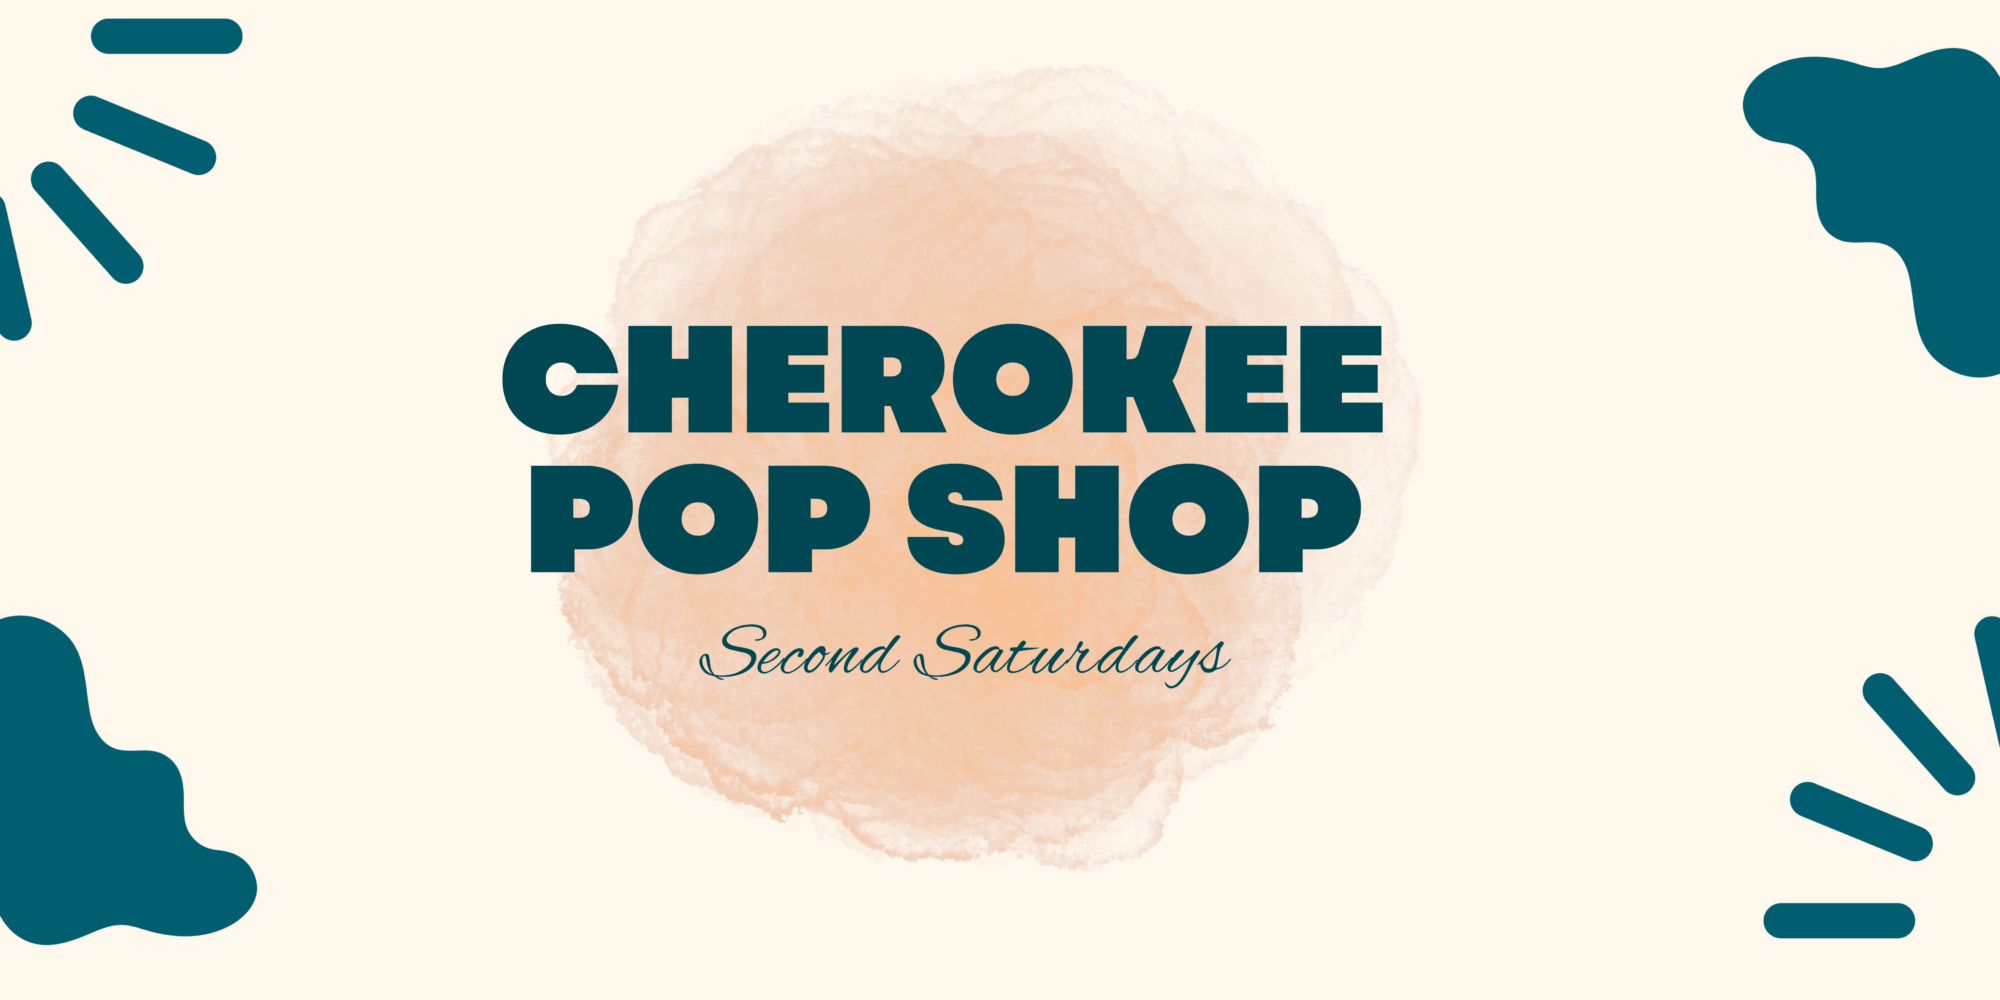 Cherokee Pop Shop on the second Saturday of the month